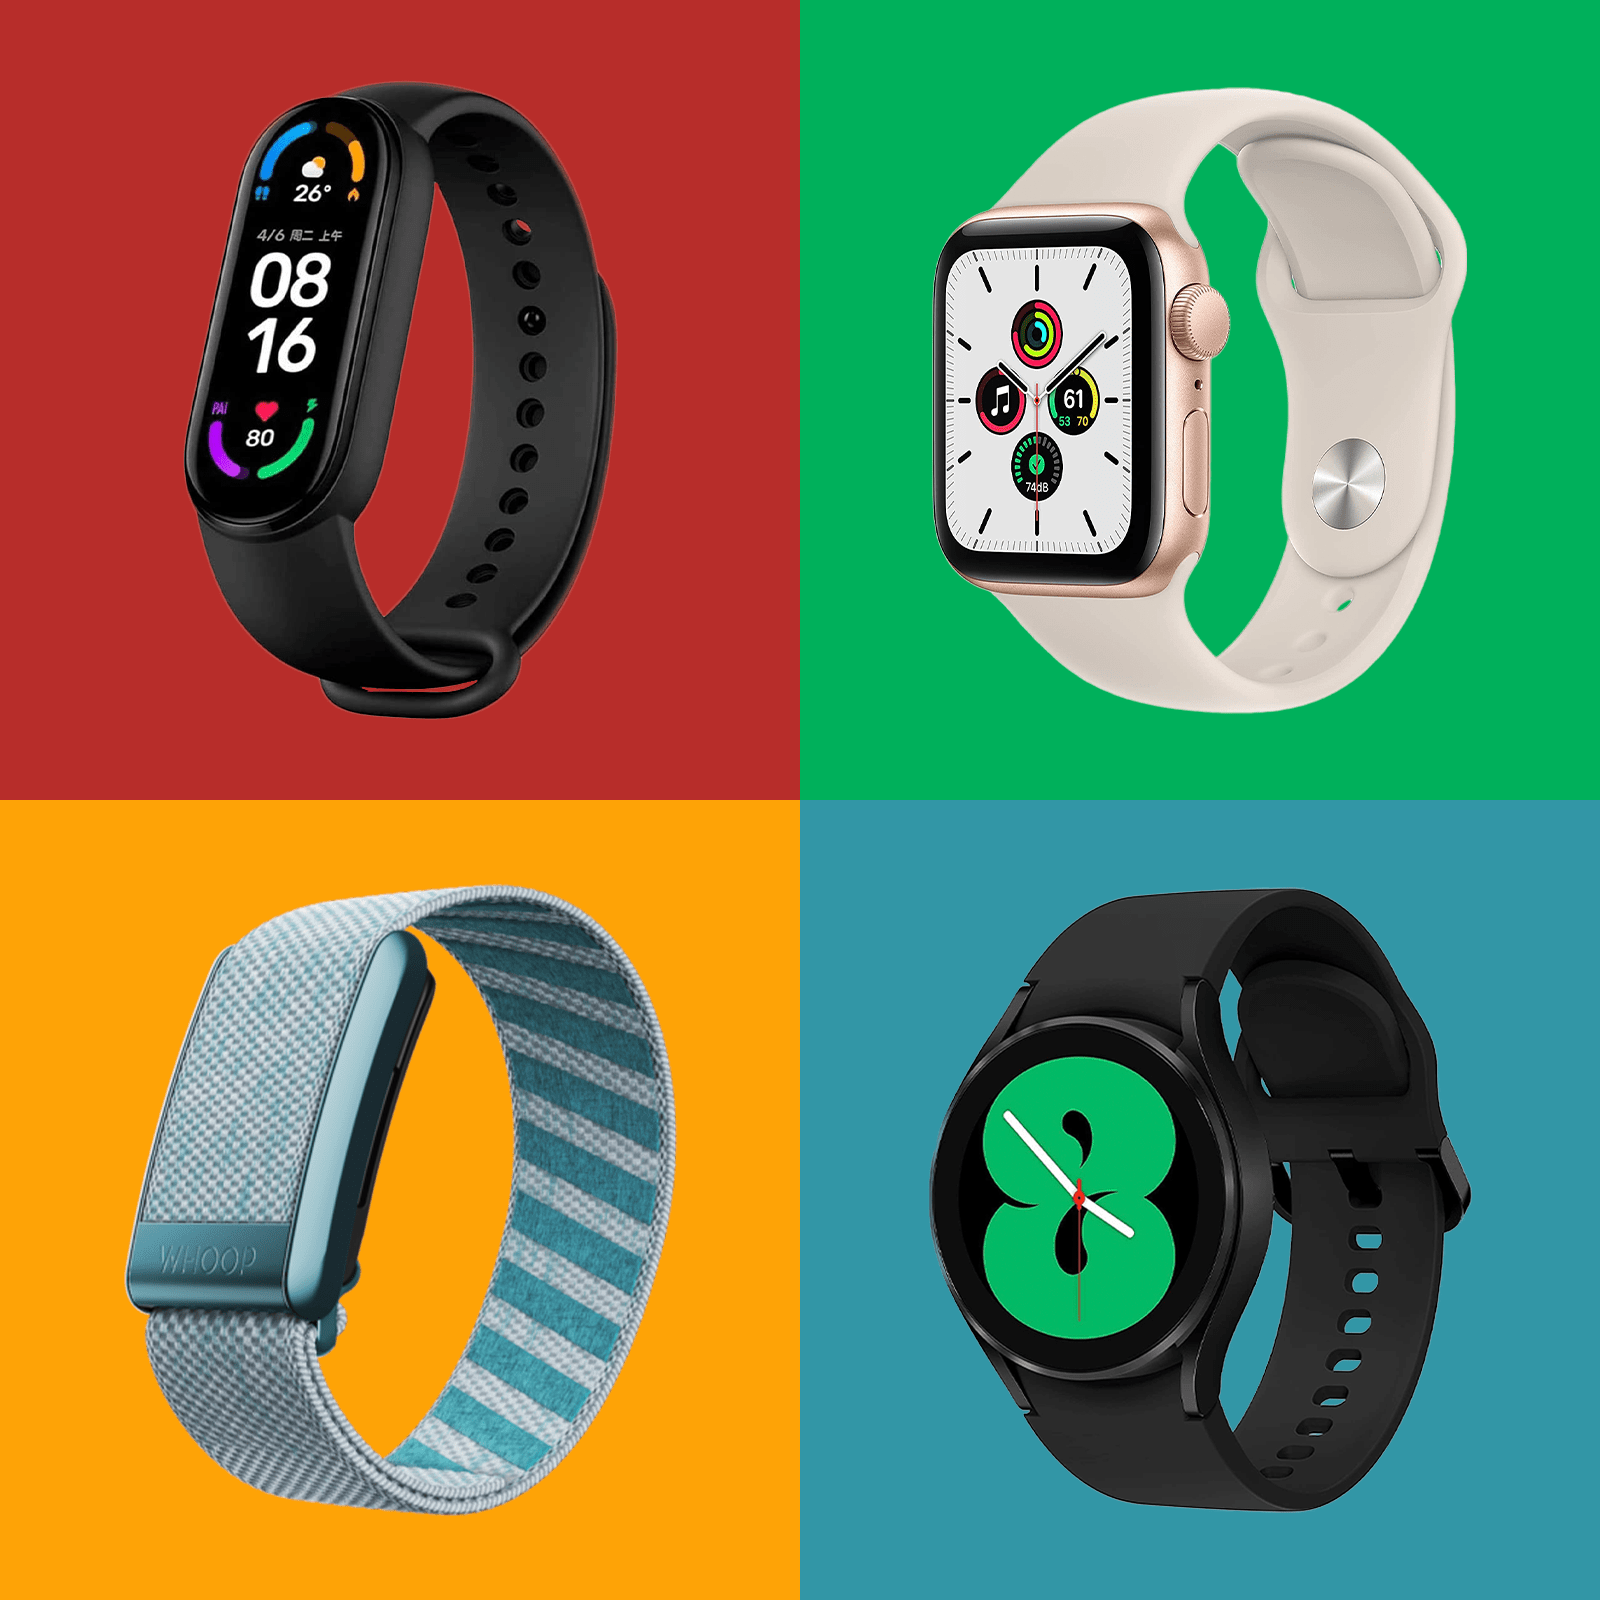 https://www.rd.com/wp-content/uploads/2022/04/the-10-best-fitness-trackers-for-your-money-ft-via-merchants.png